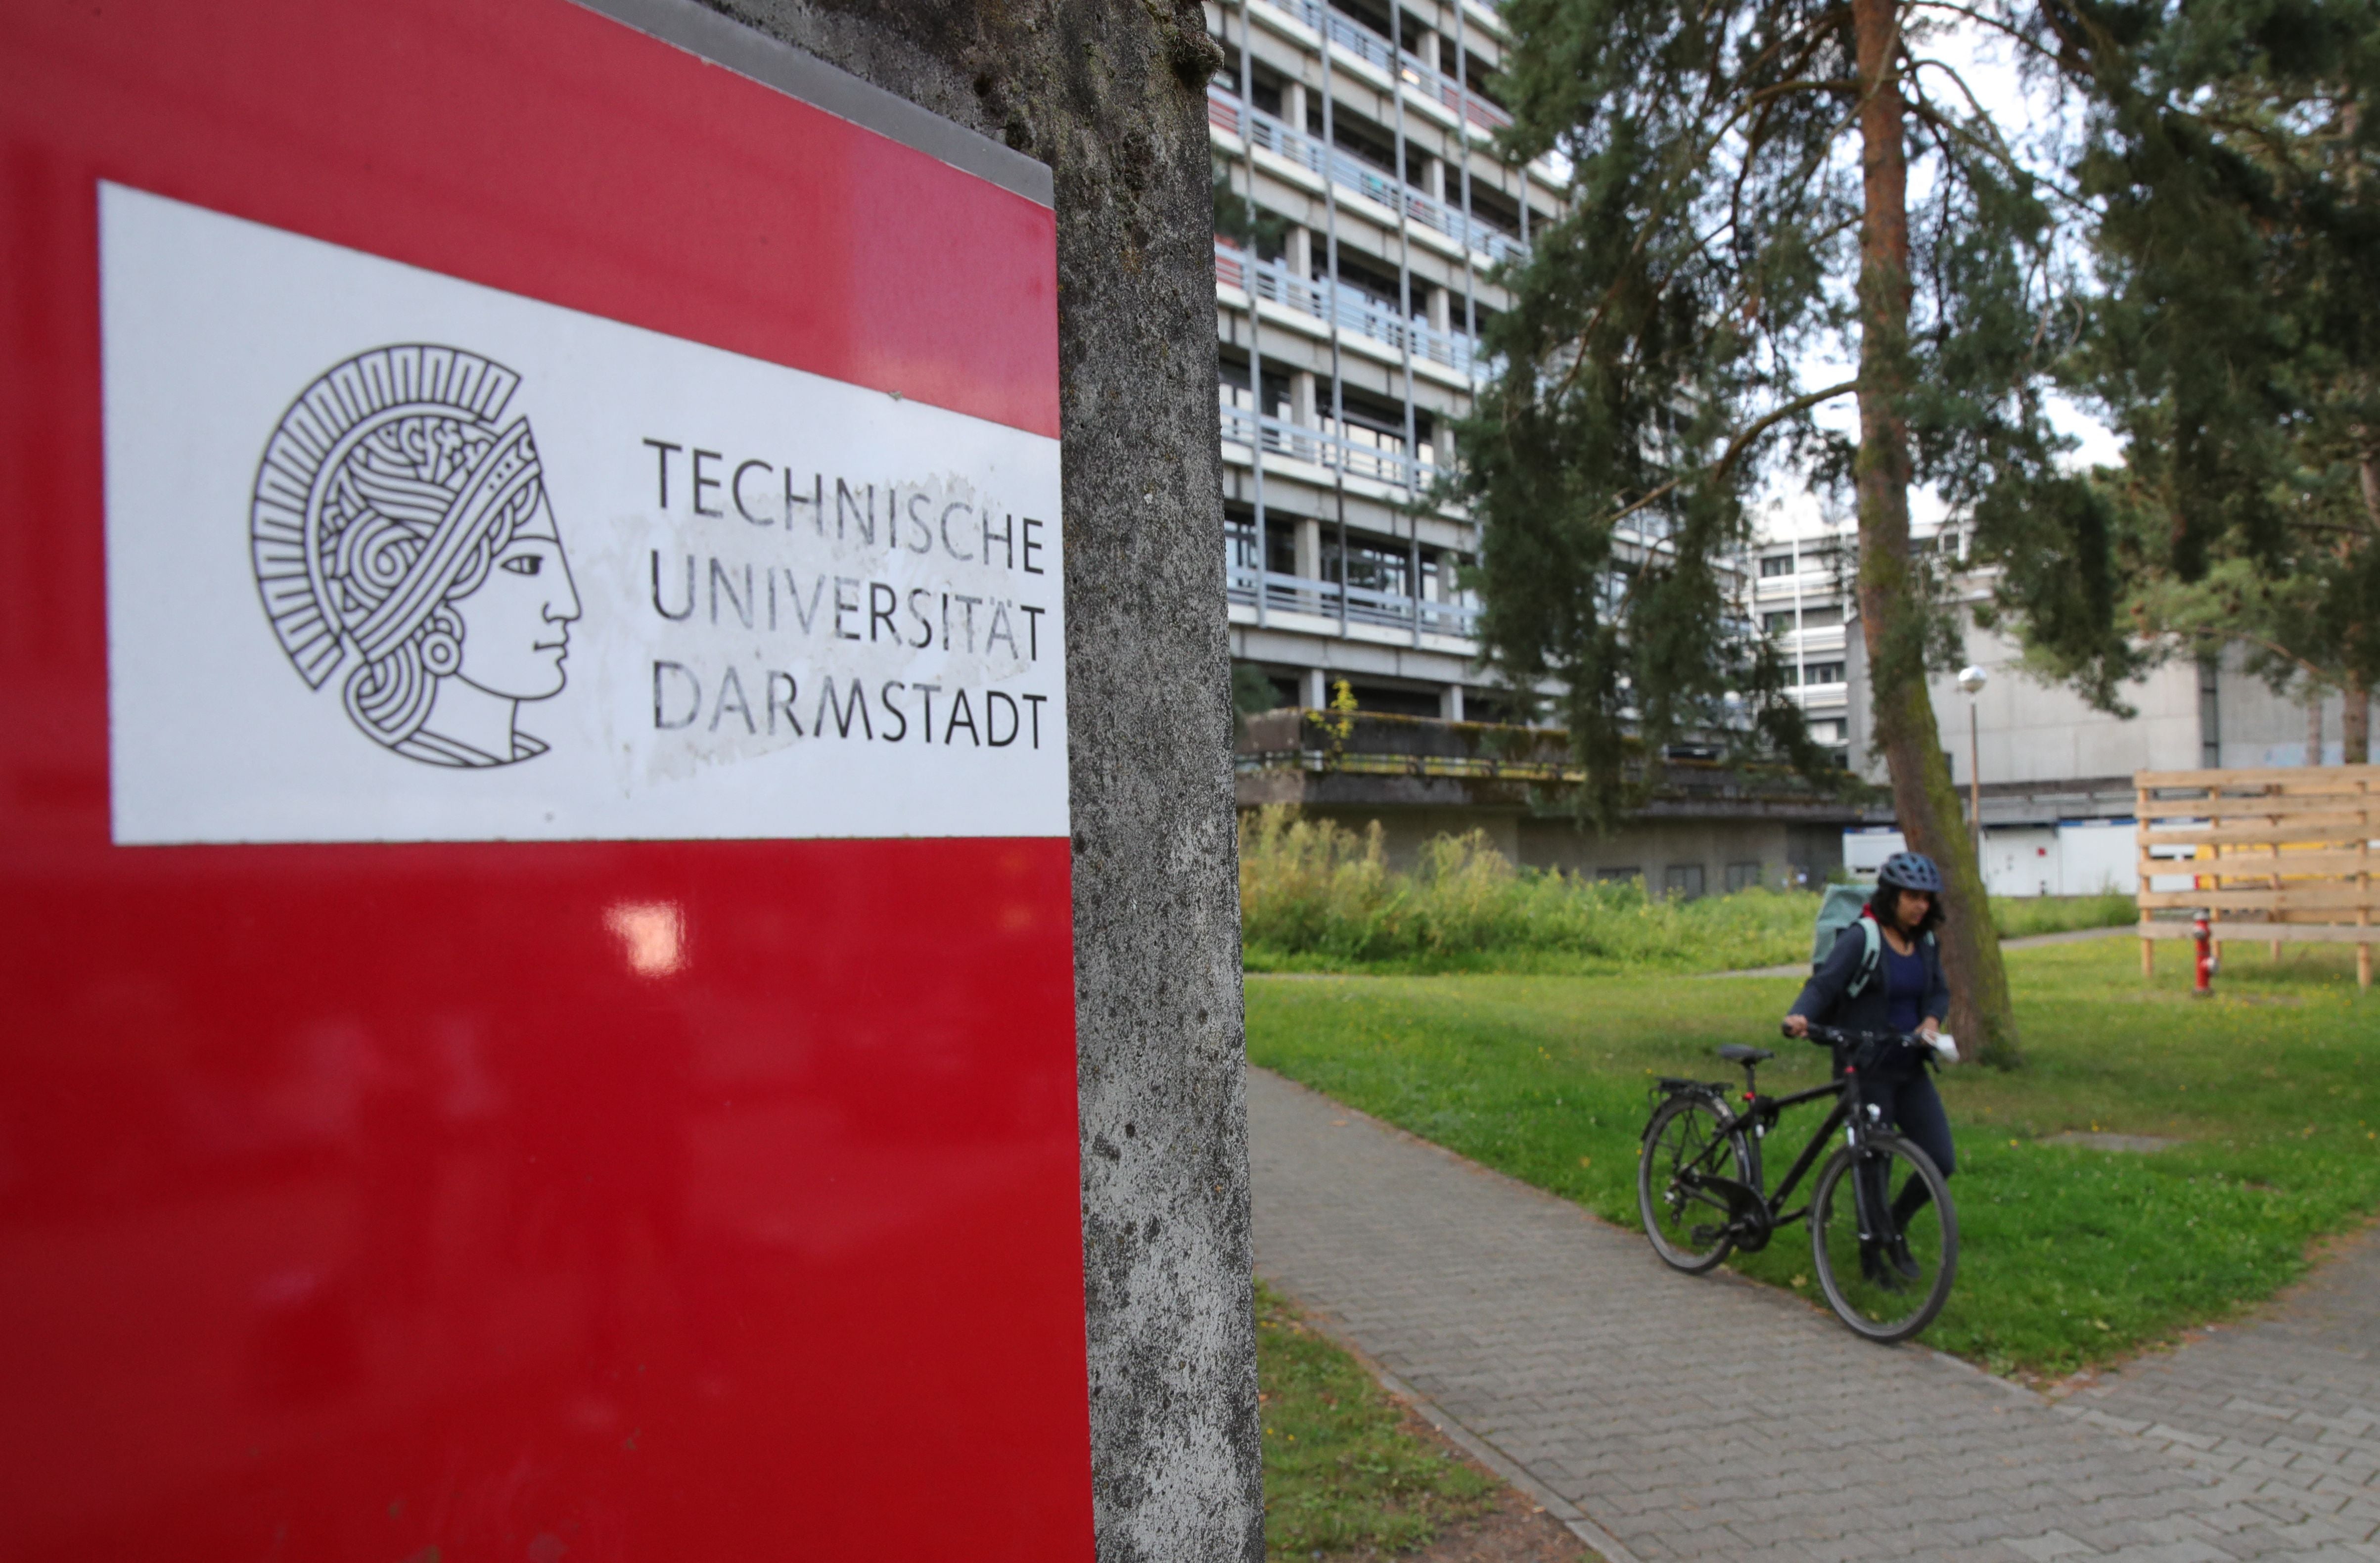 Seven people have been poisoned at at the Technical University Darmstadt, in Germany